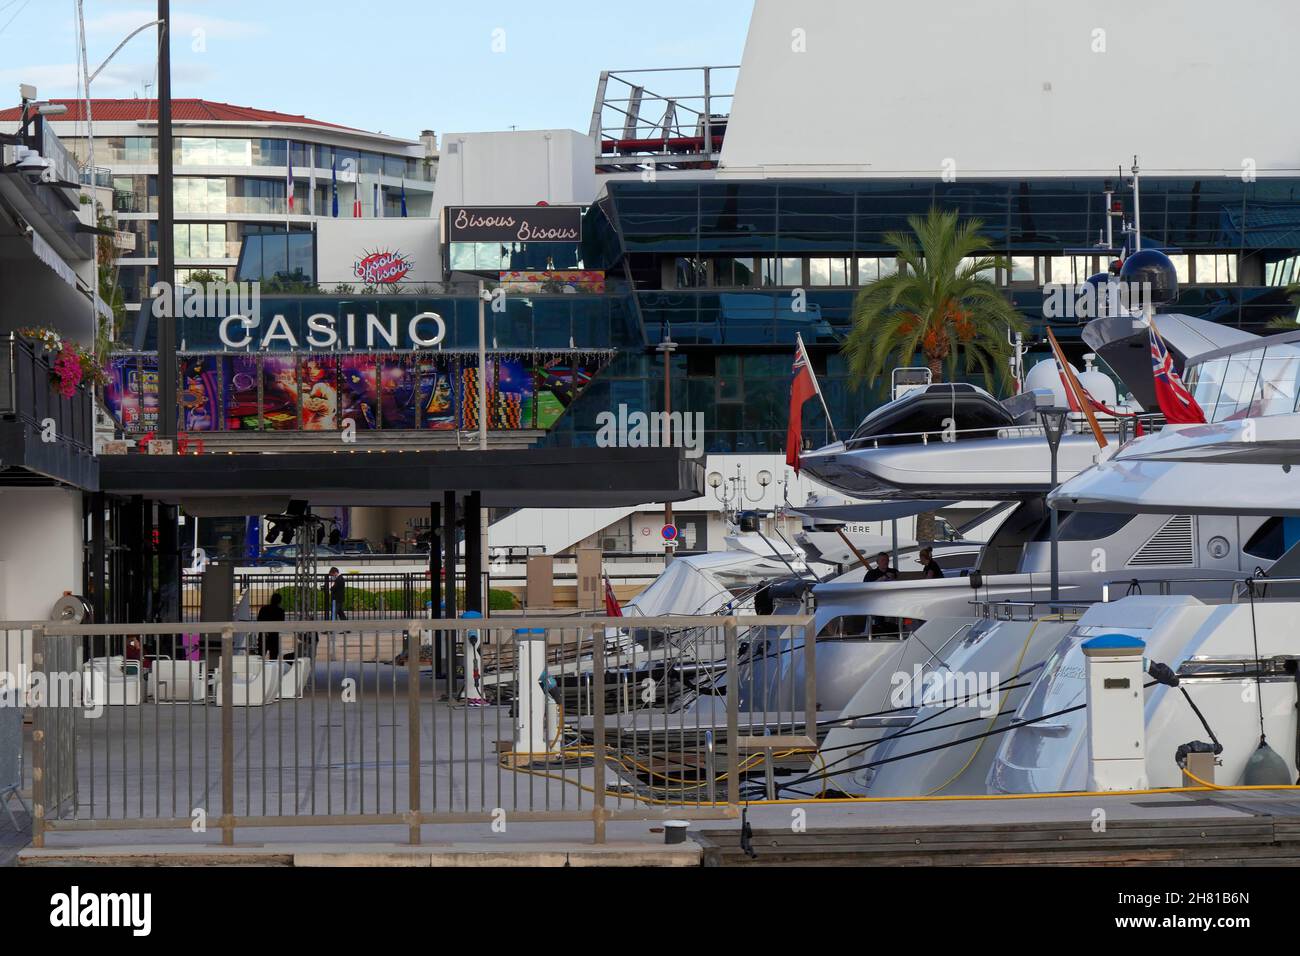 stern of superyachts moored near the casino in Cannes, Alpes-Maritimes,France Stock Photo